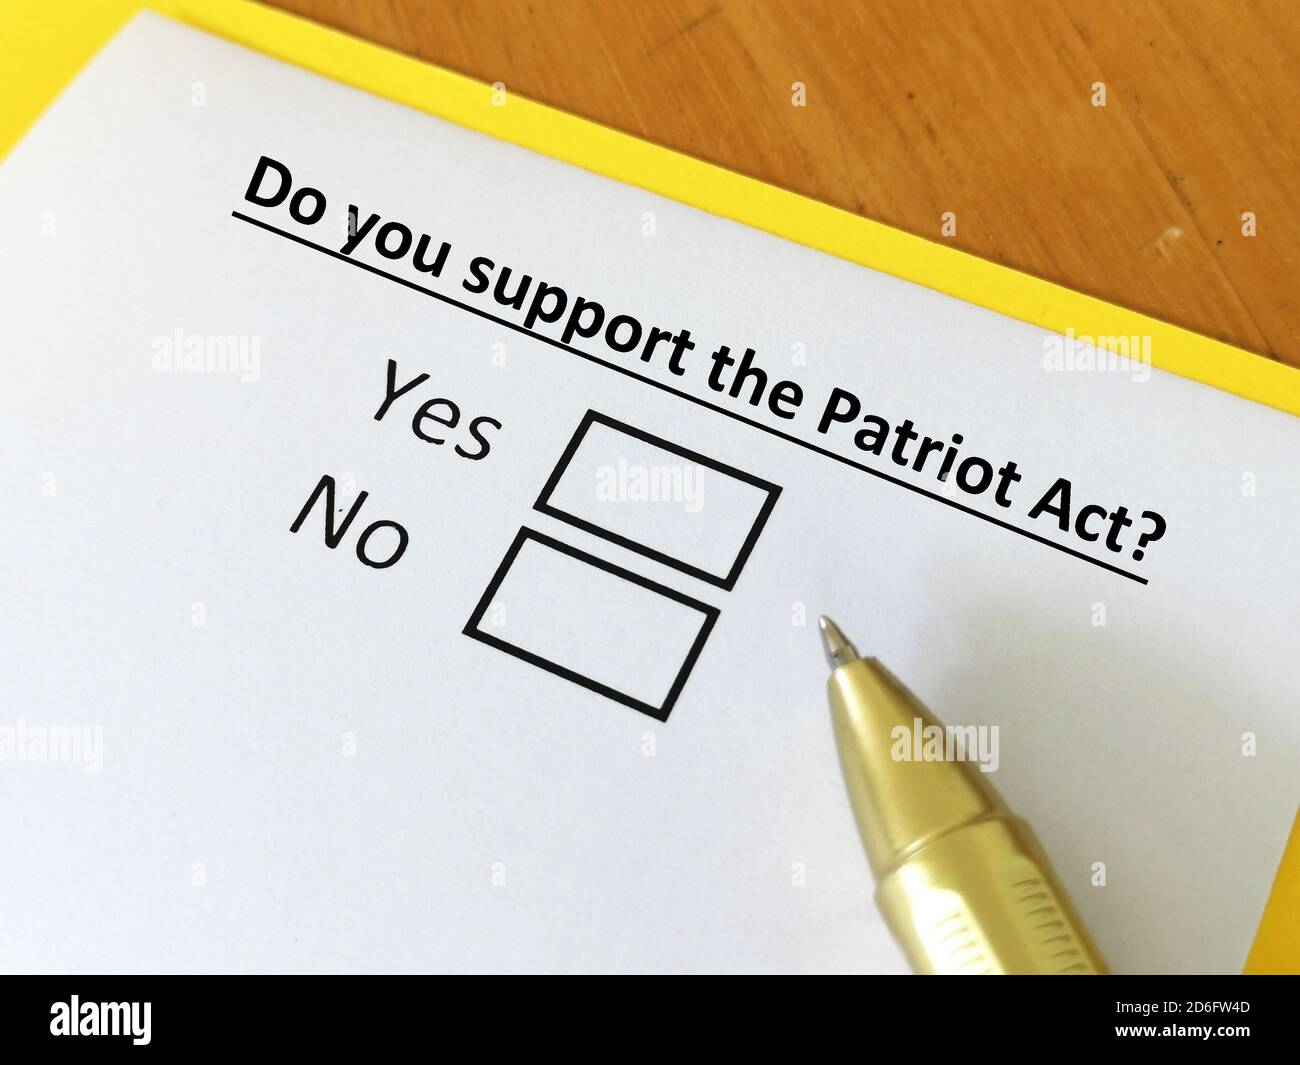 One person is answering question about supporting patriot act. Stock Photo